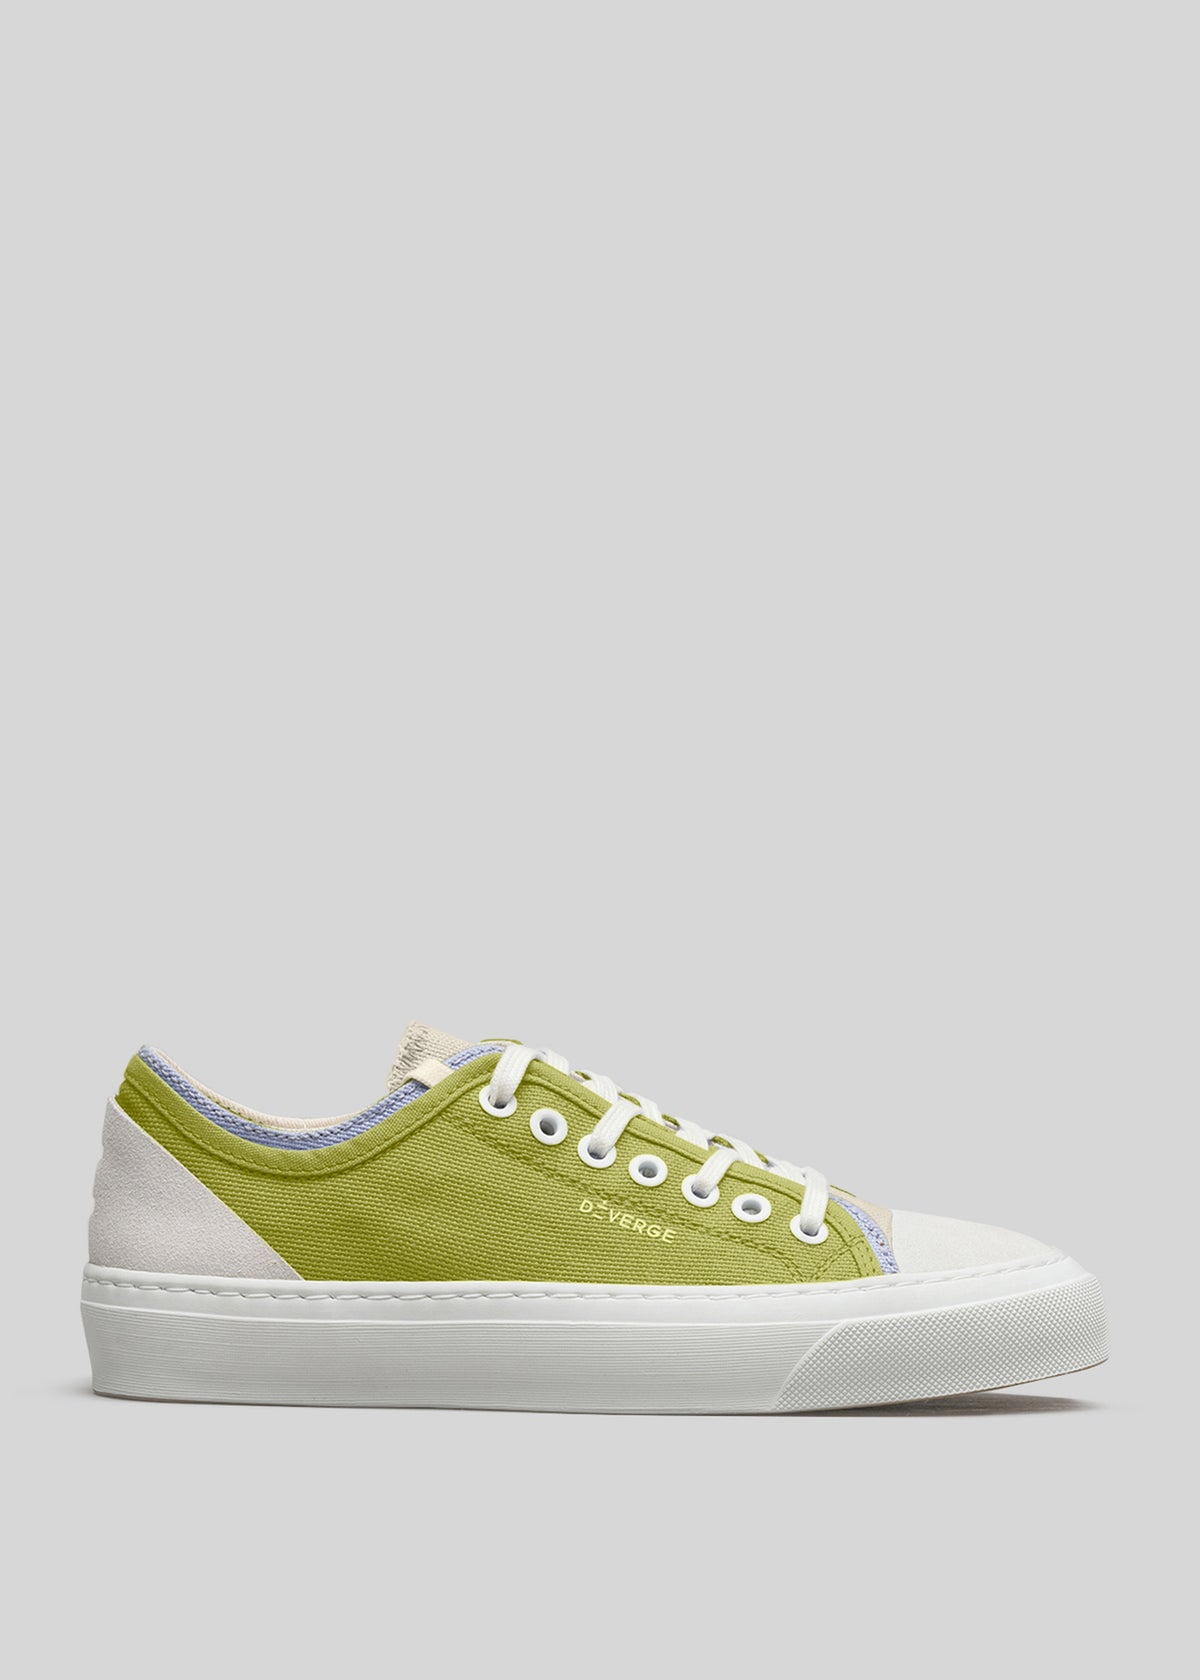 olive and white premium canvas multi-layered low sneakers sideview